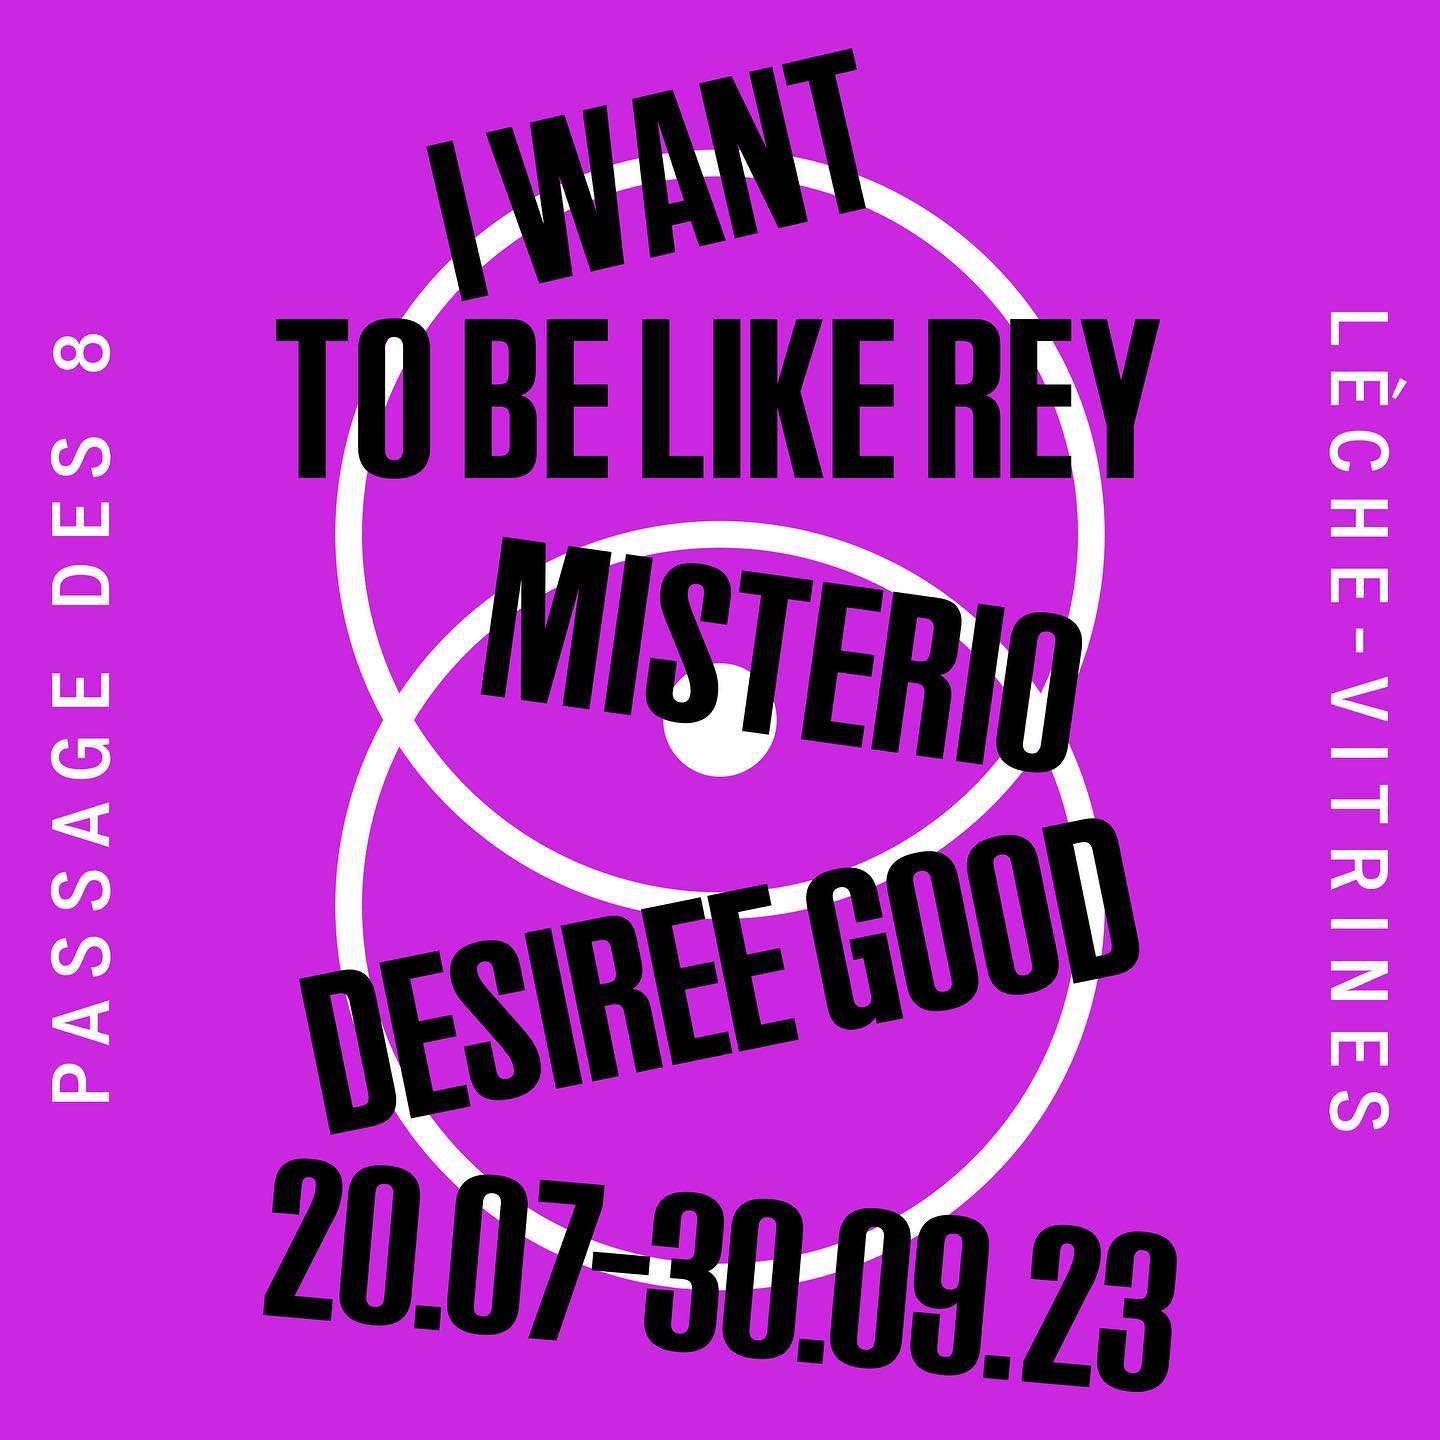 Desiree Good – I Want To Be Like Rey Misterio